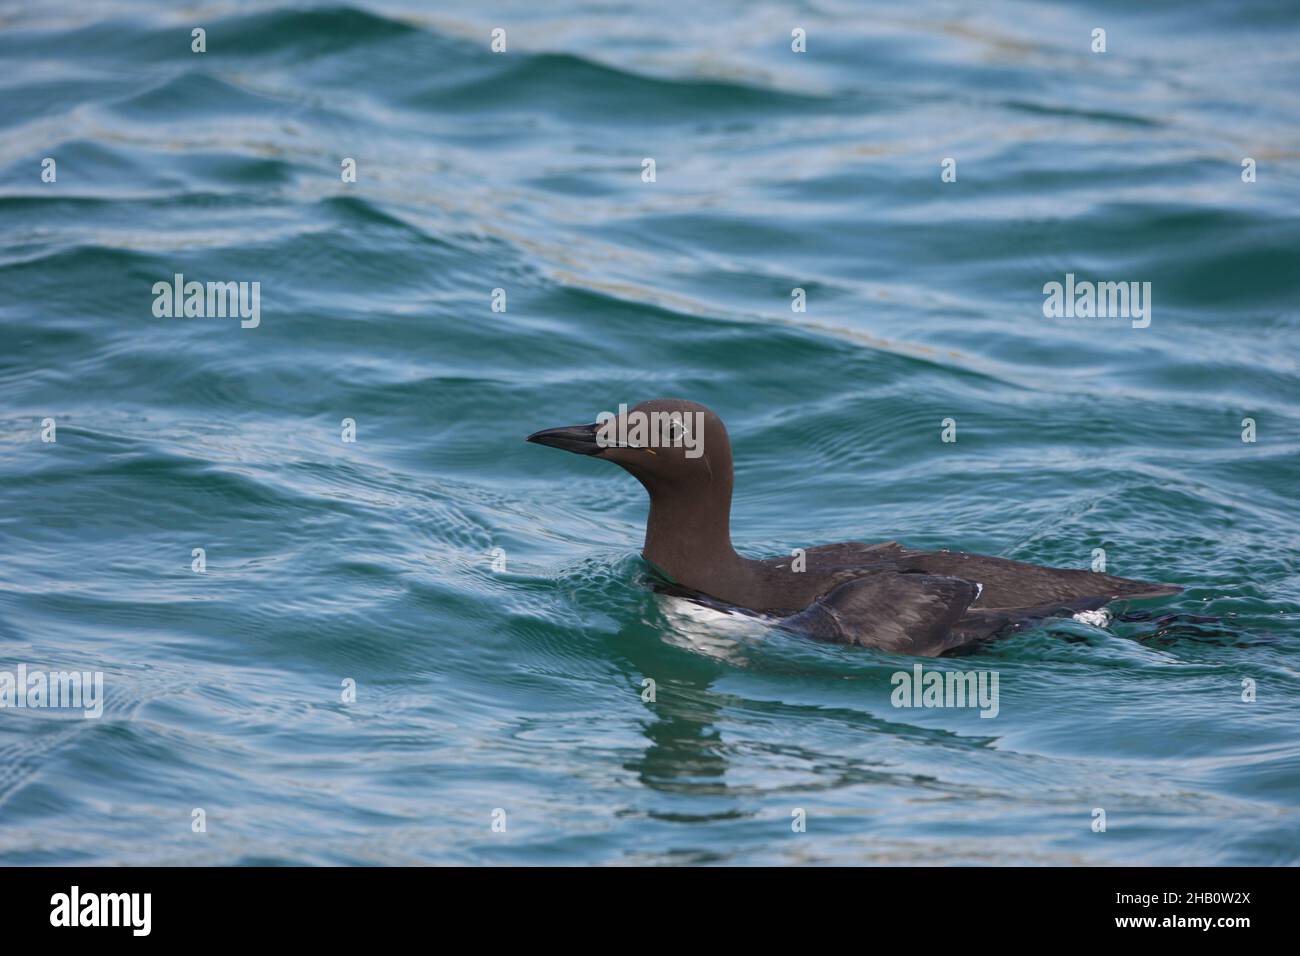 Guillemot can dive up to 60m to catch prey to either feed on before surfacing, or return to the nest to feed their chick. Stock Photo